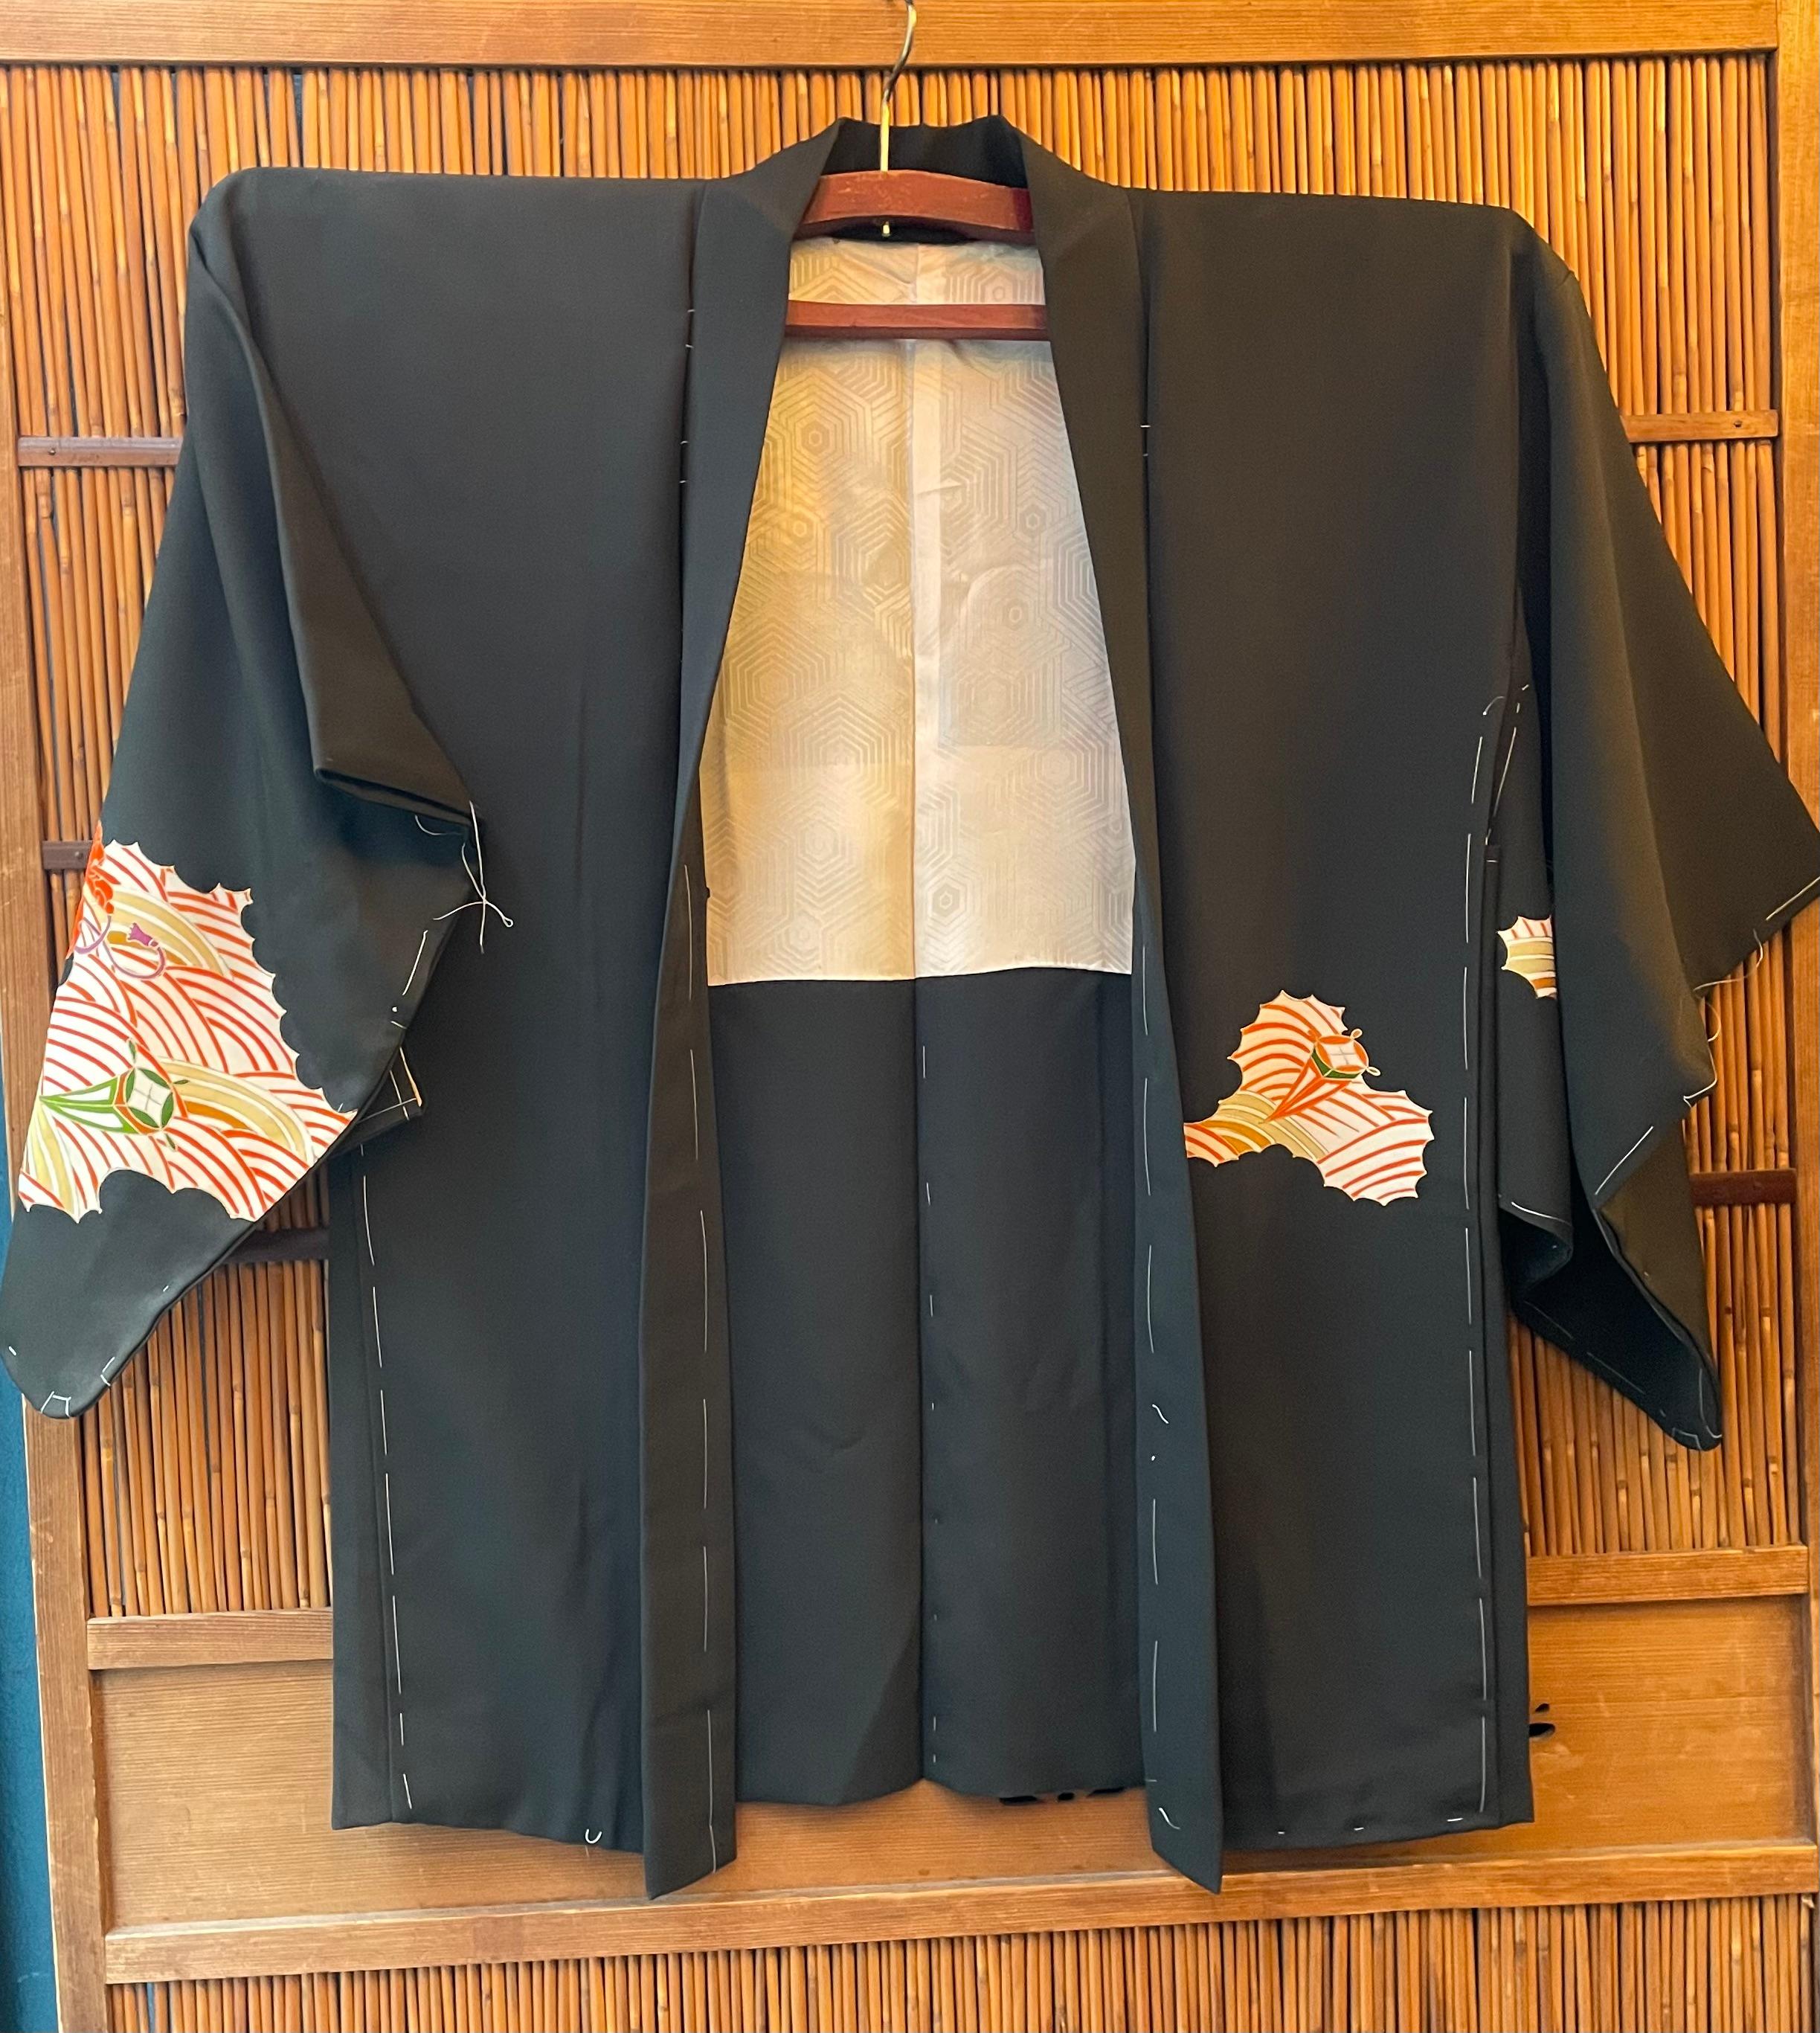 This haori jacket was made around Taisho era which is between 1912 and 1926.
It is made with silk and the main colour is black. The design is waves in white and orange.

Dimensions(cm) :
length 80.
width: 65.
sleeve length: 33.
sleeve height: